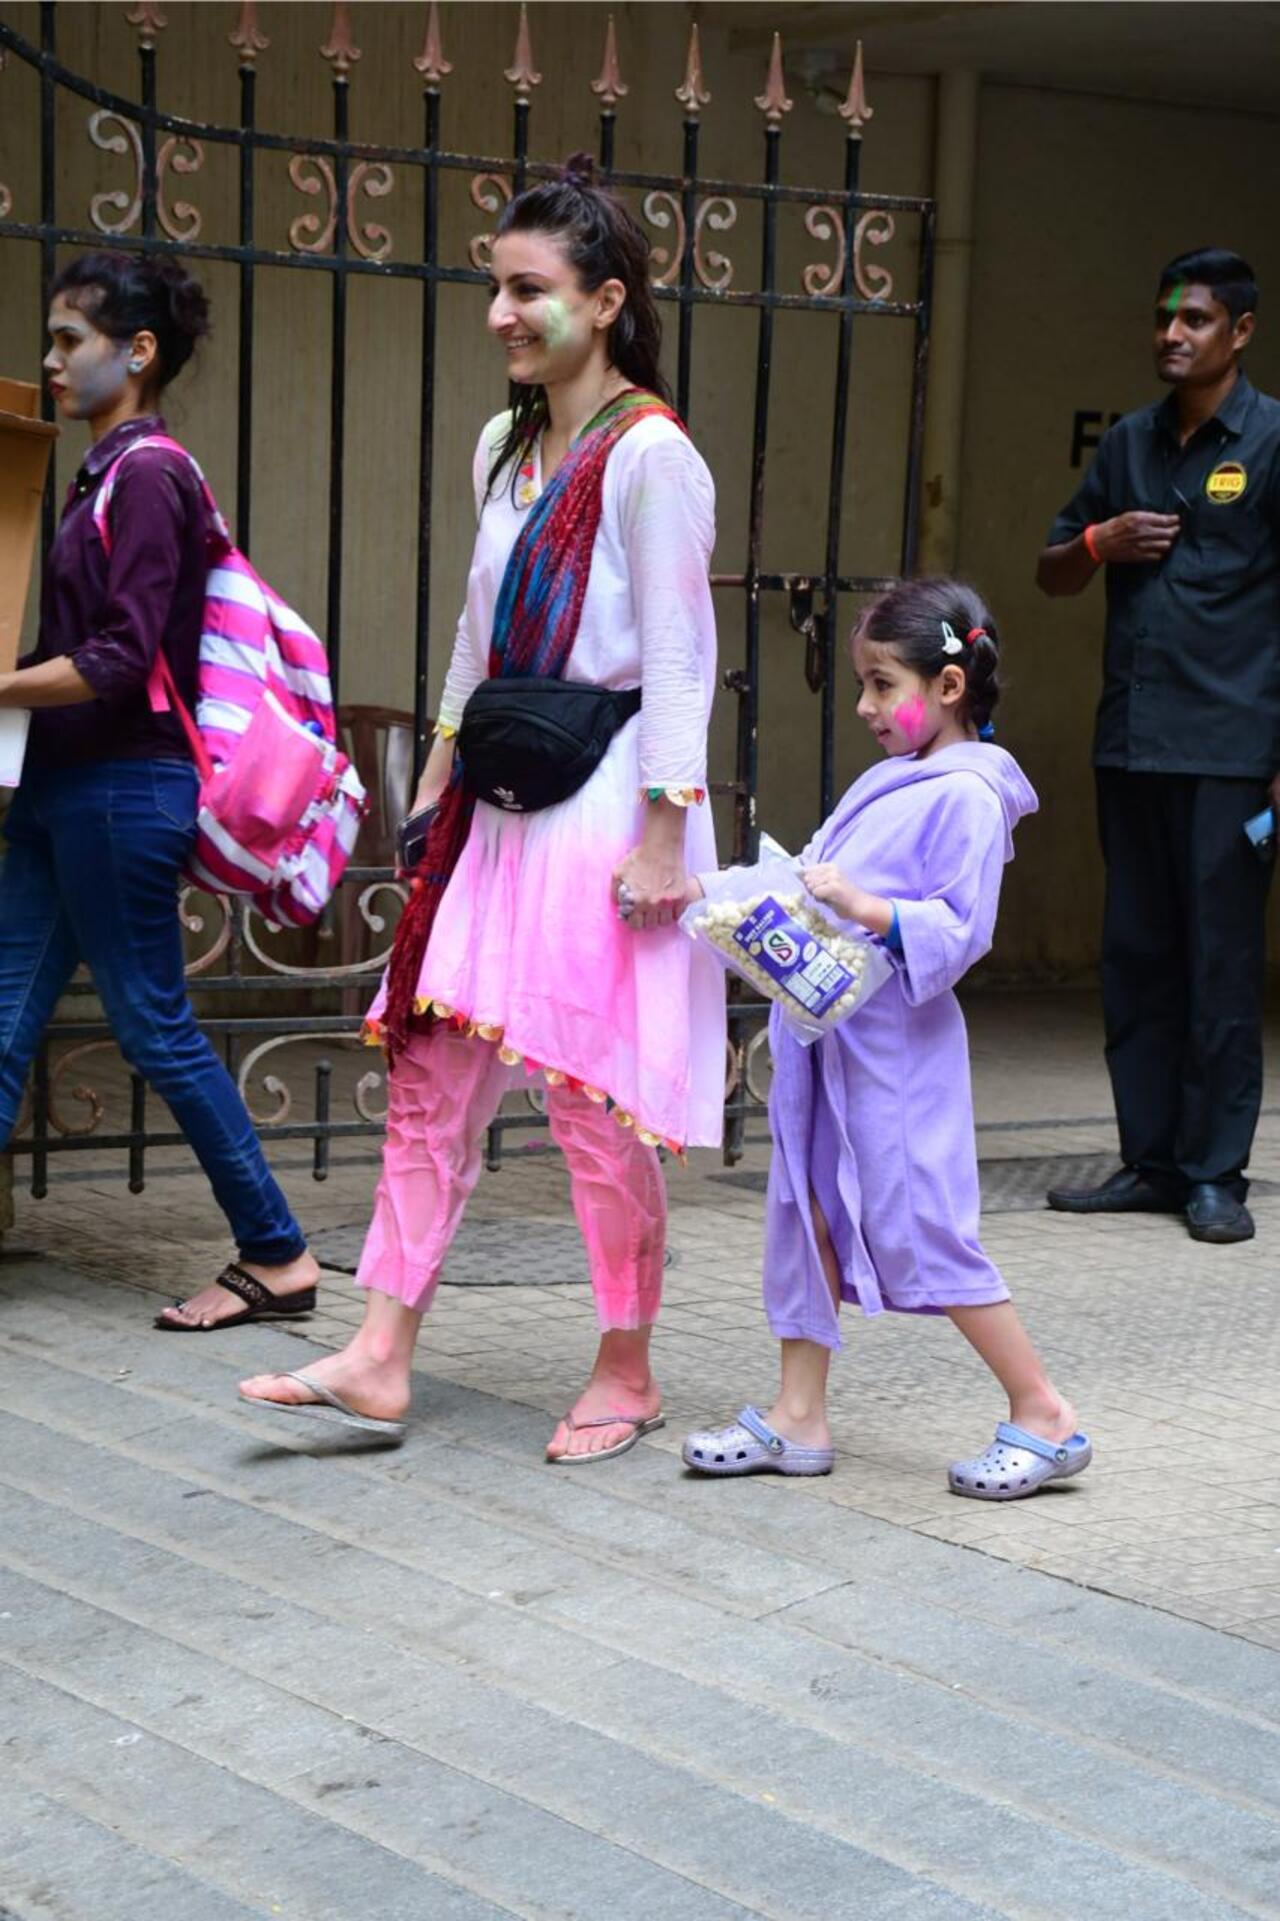 Soha Ali Khan drenched in coloured water as she walks with her daughter Inaaya